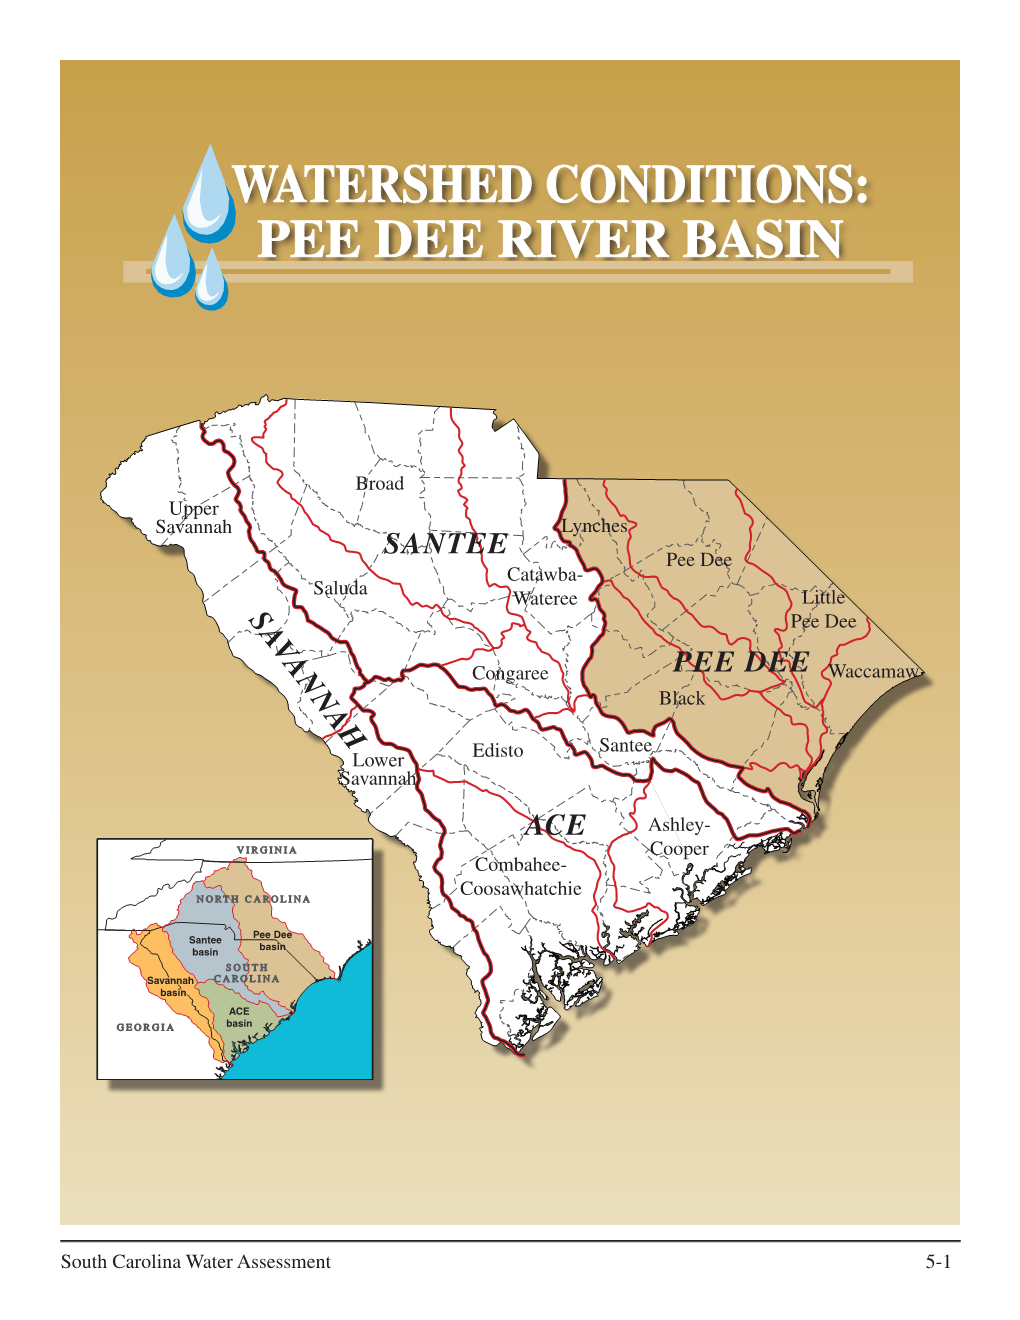 Watershed Conditions: Pee Dee River Basin